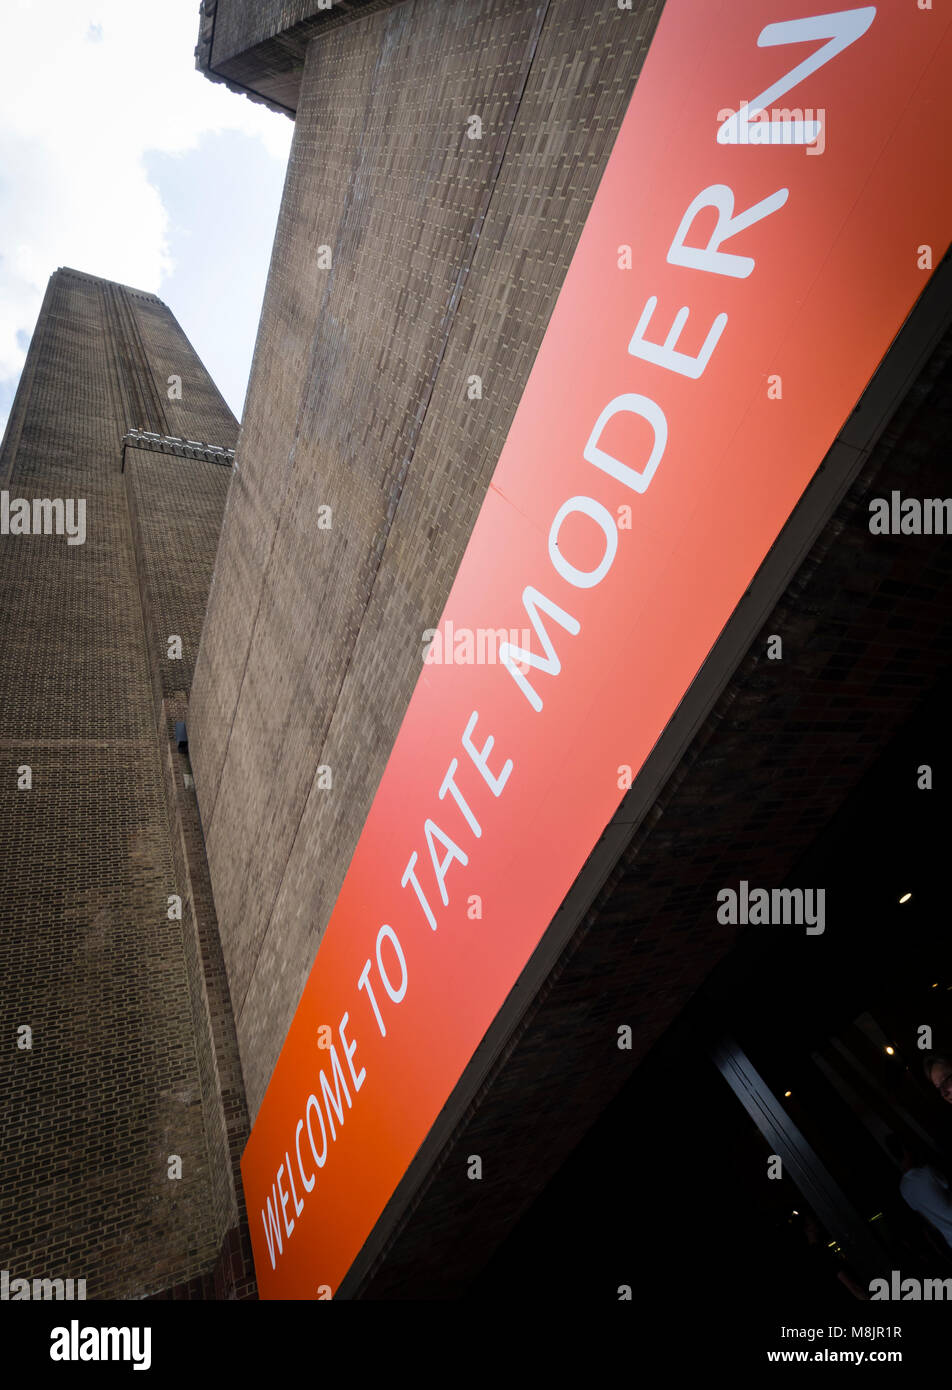 London, UK - 2 Sep 2017: Entrance to the Tate Modern ('Tate Gallery of Modern Art'), one of the world's largest collection for modern art at  London's Borough of Southwark. Stock Photo